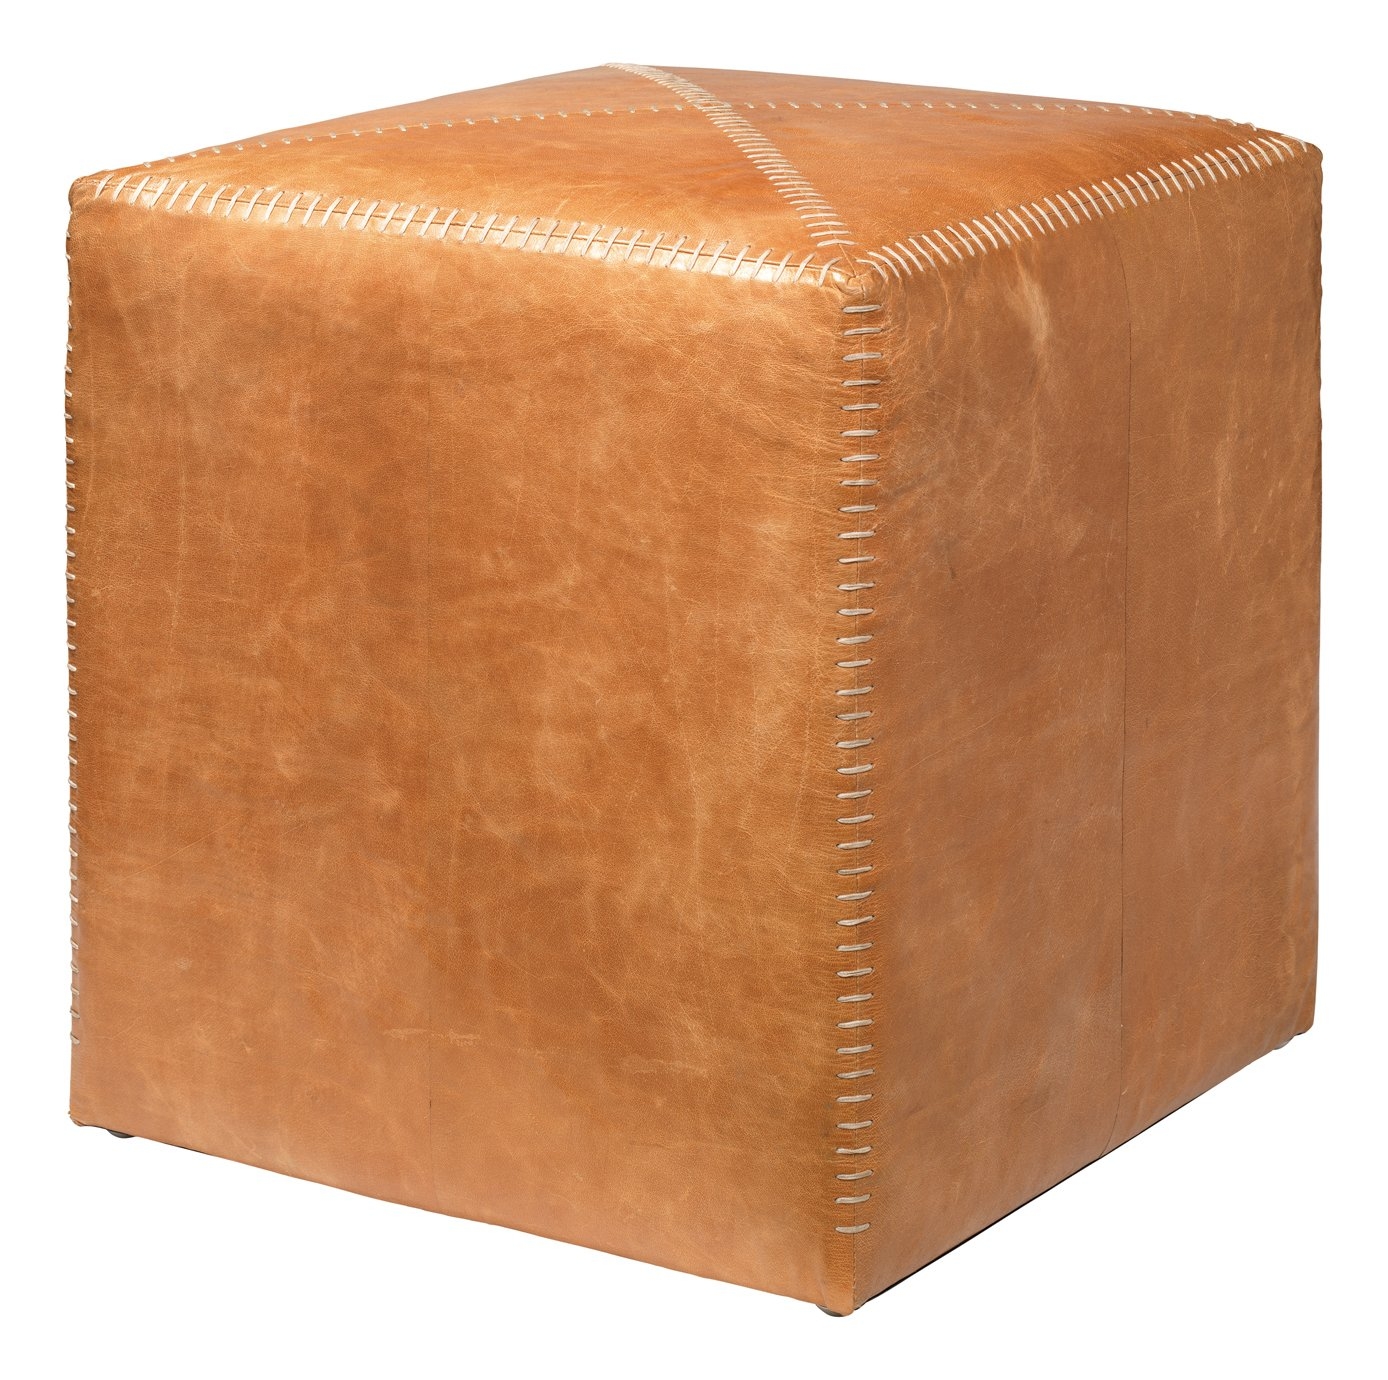 Jamie young company buff leather cube ottoman